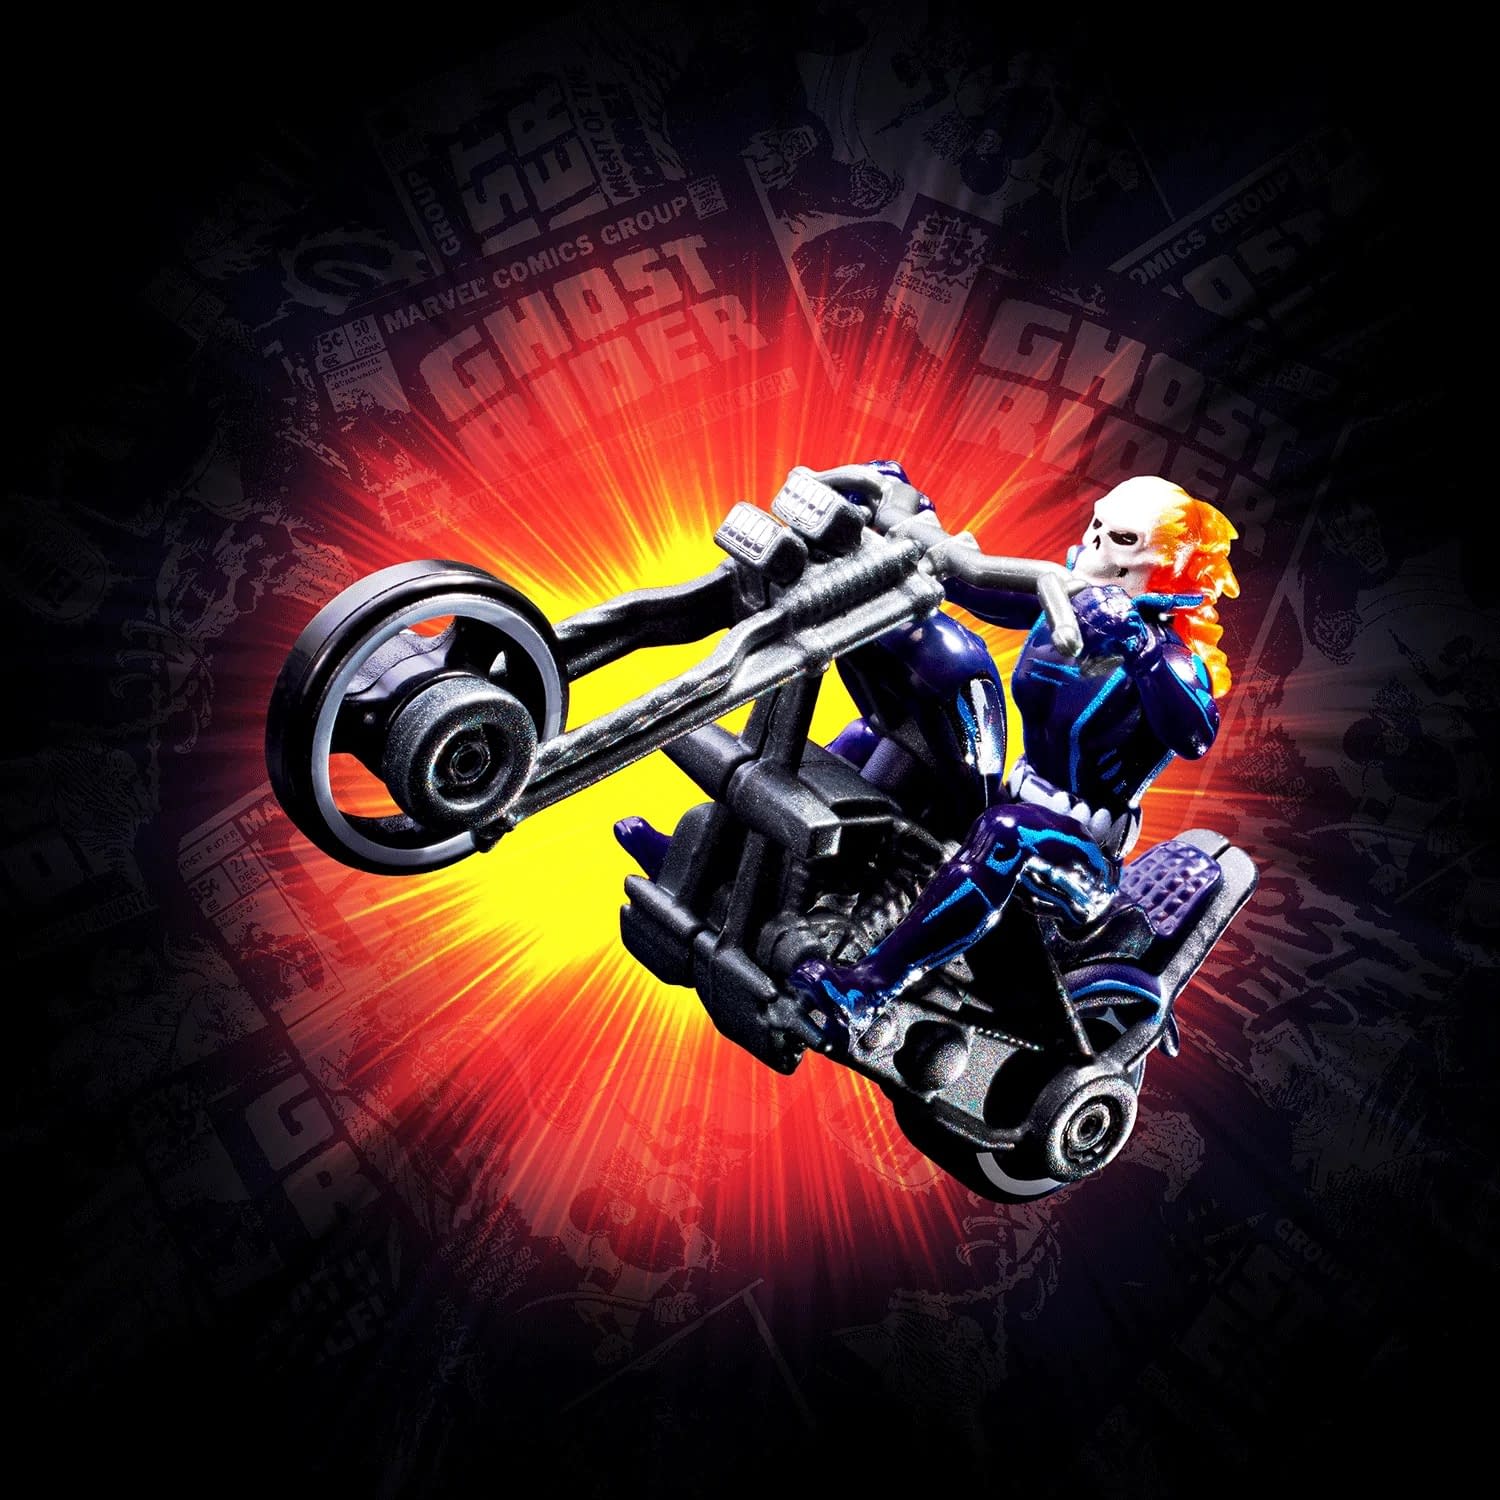 Ghost Rider Brings the Heat to SDCC with New Hot Wheels Exclusive 